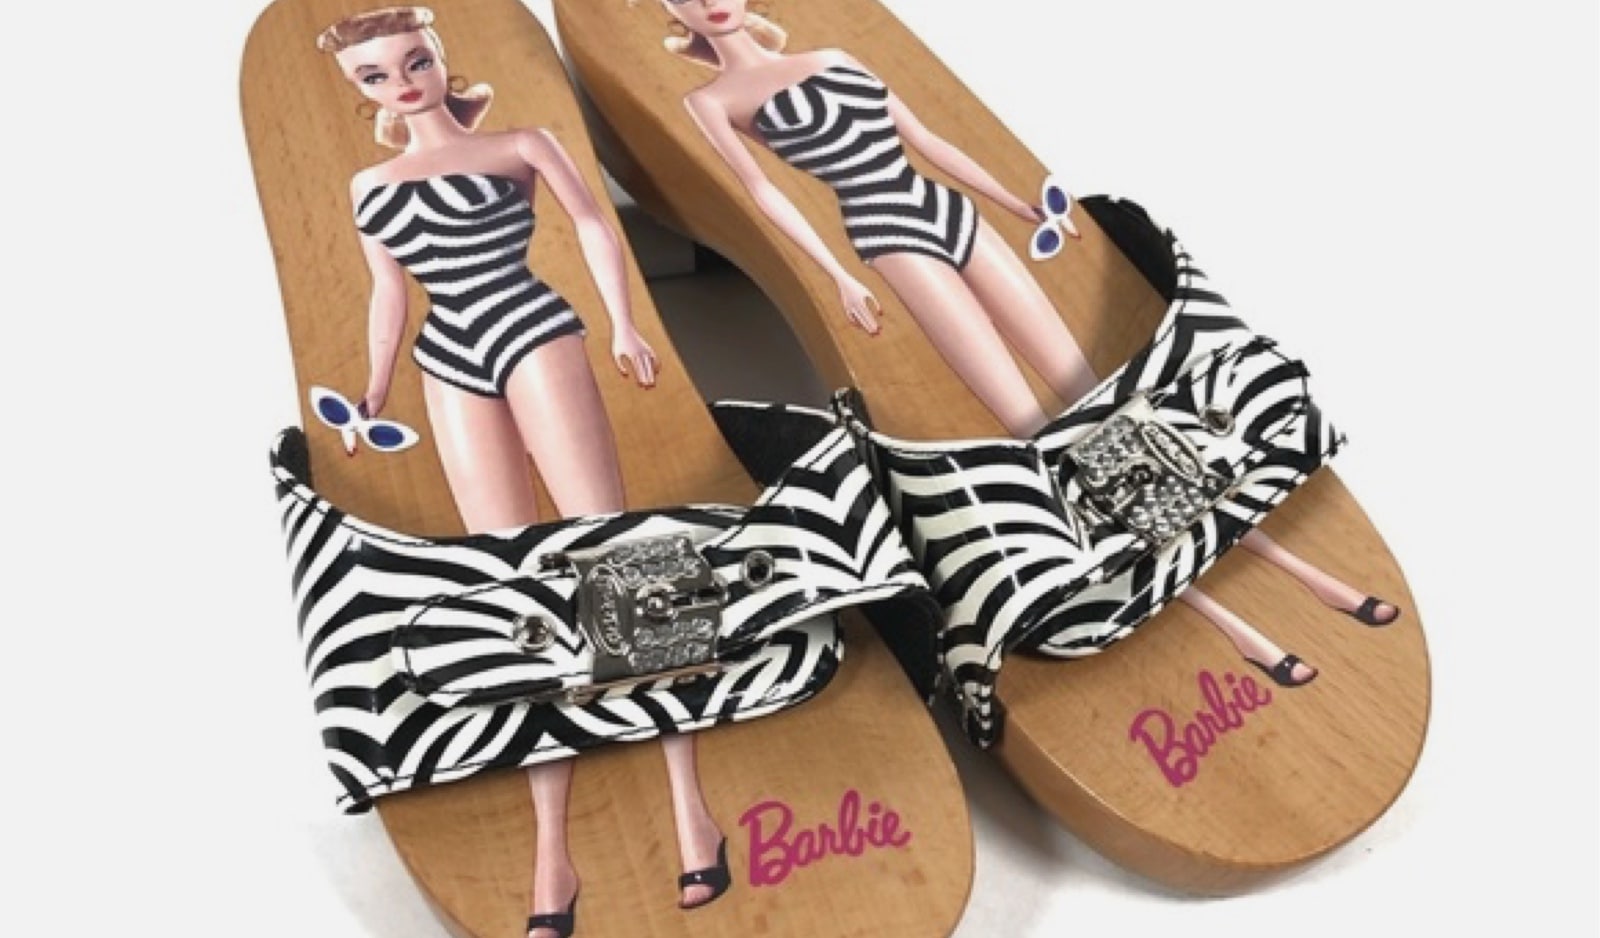 dr. scholls and barbie collaboration